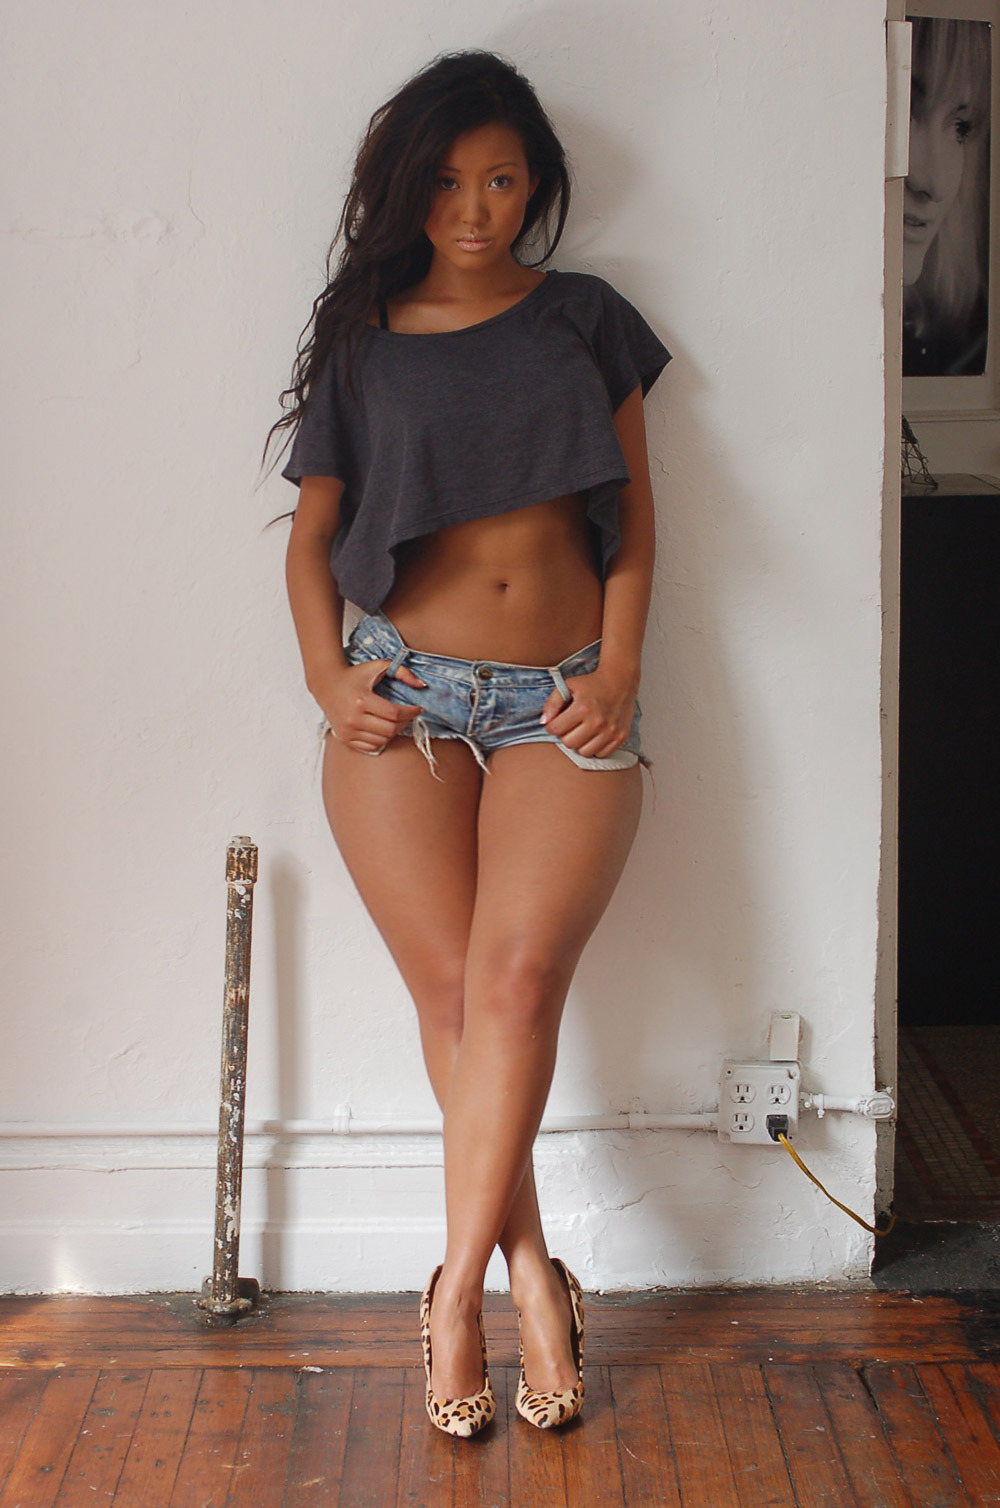 Asian women with thick legs